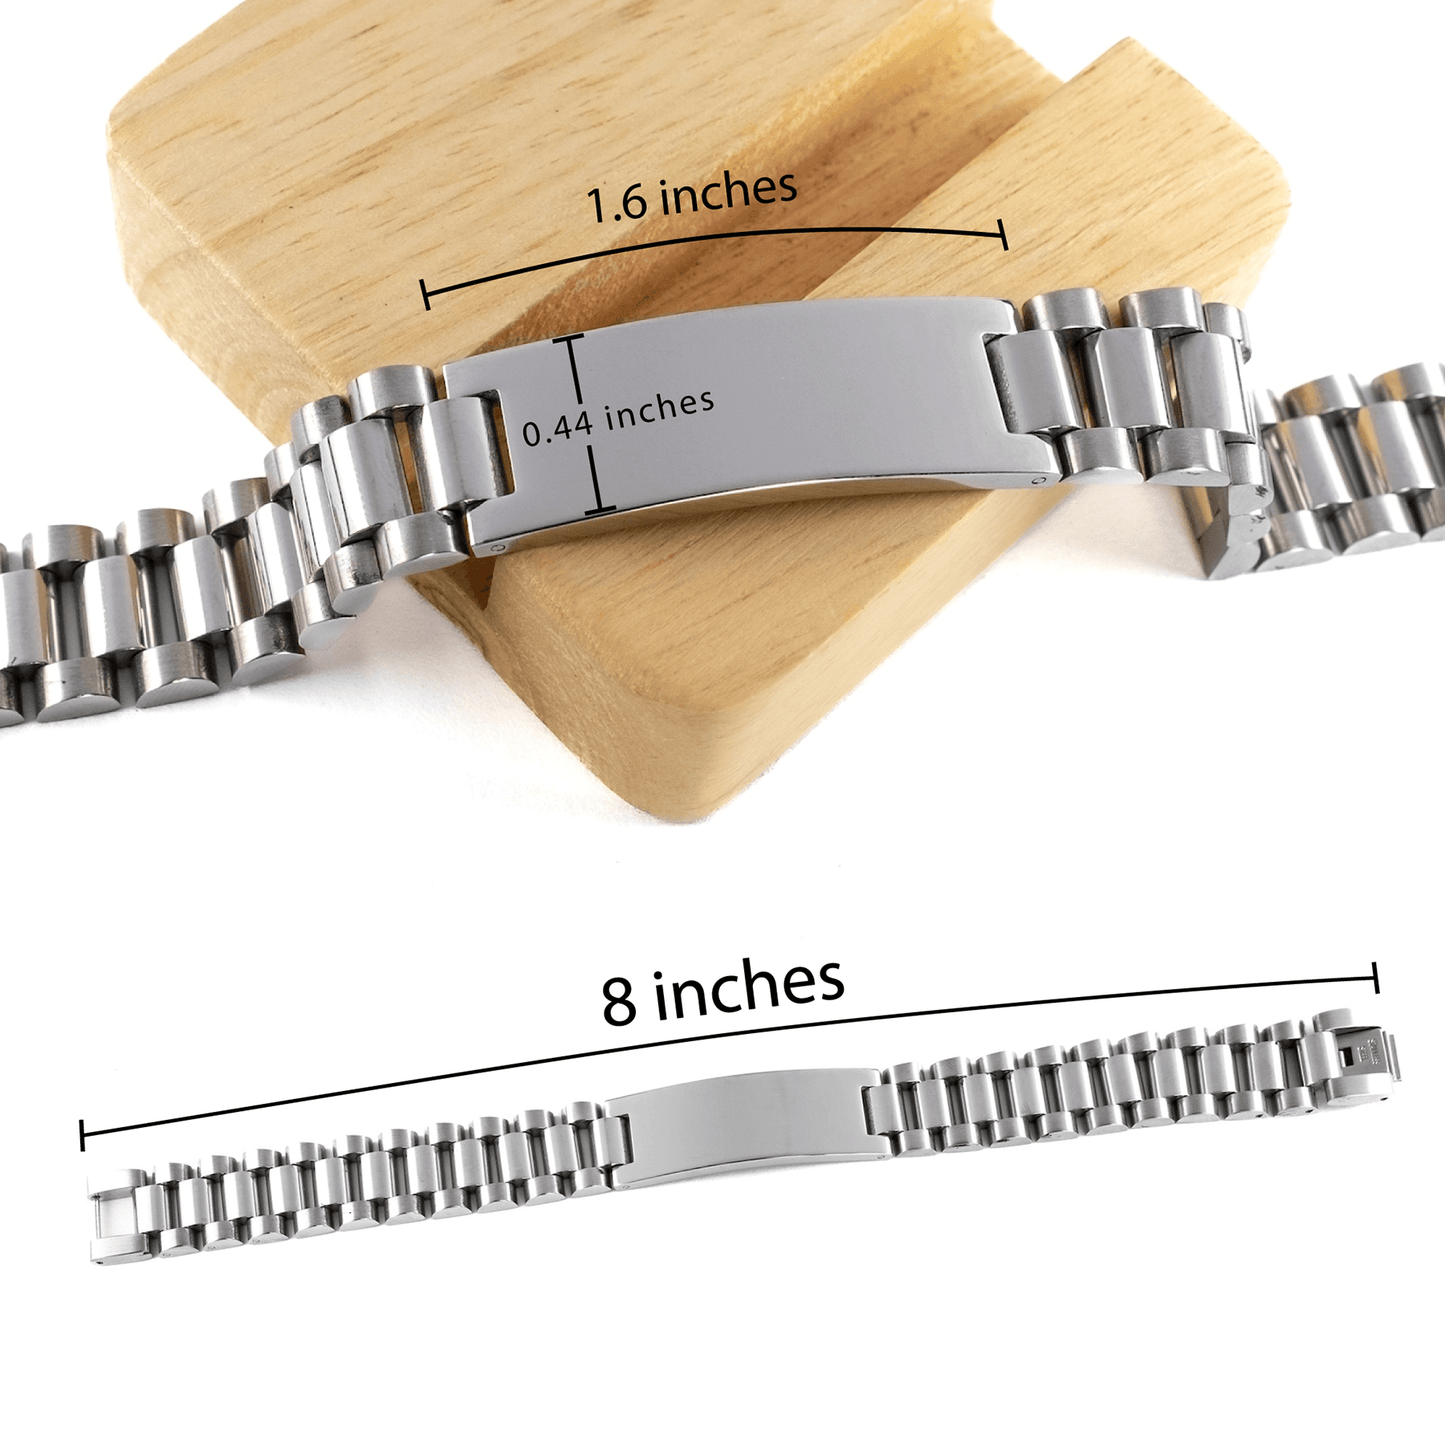 Sarcastic Aeronautical Engineer Ladder Stainless Steel Bracelet Gifts, Christmas Holiday Gifts for Aeronautical Engineer Birthday, Aeronautical Engineer: Because greatness is woven into the fabric of every day, Coworkers, Friends - Mallard Moon Gift Shop